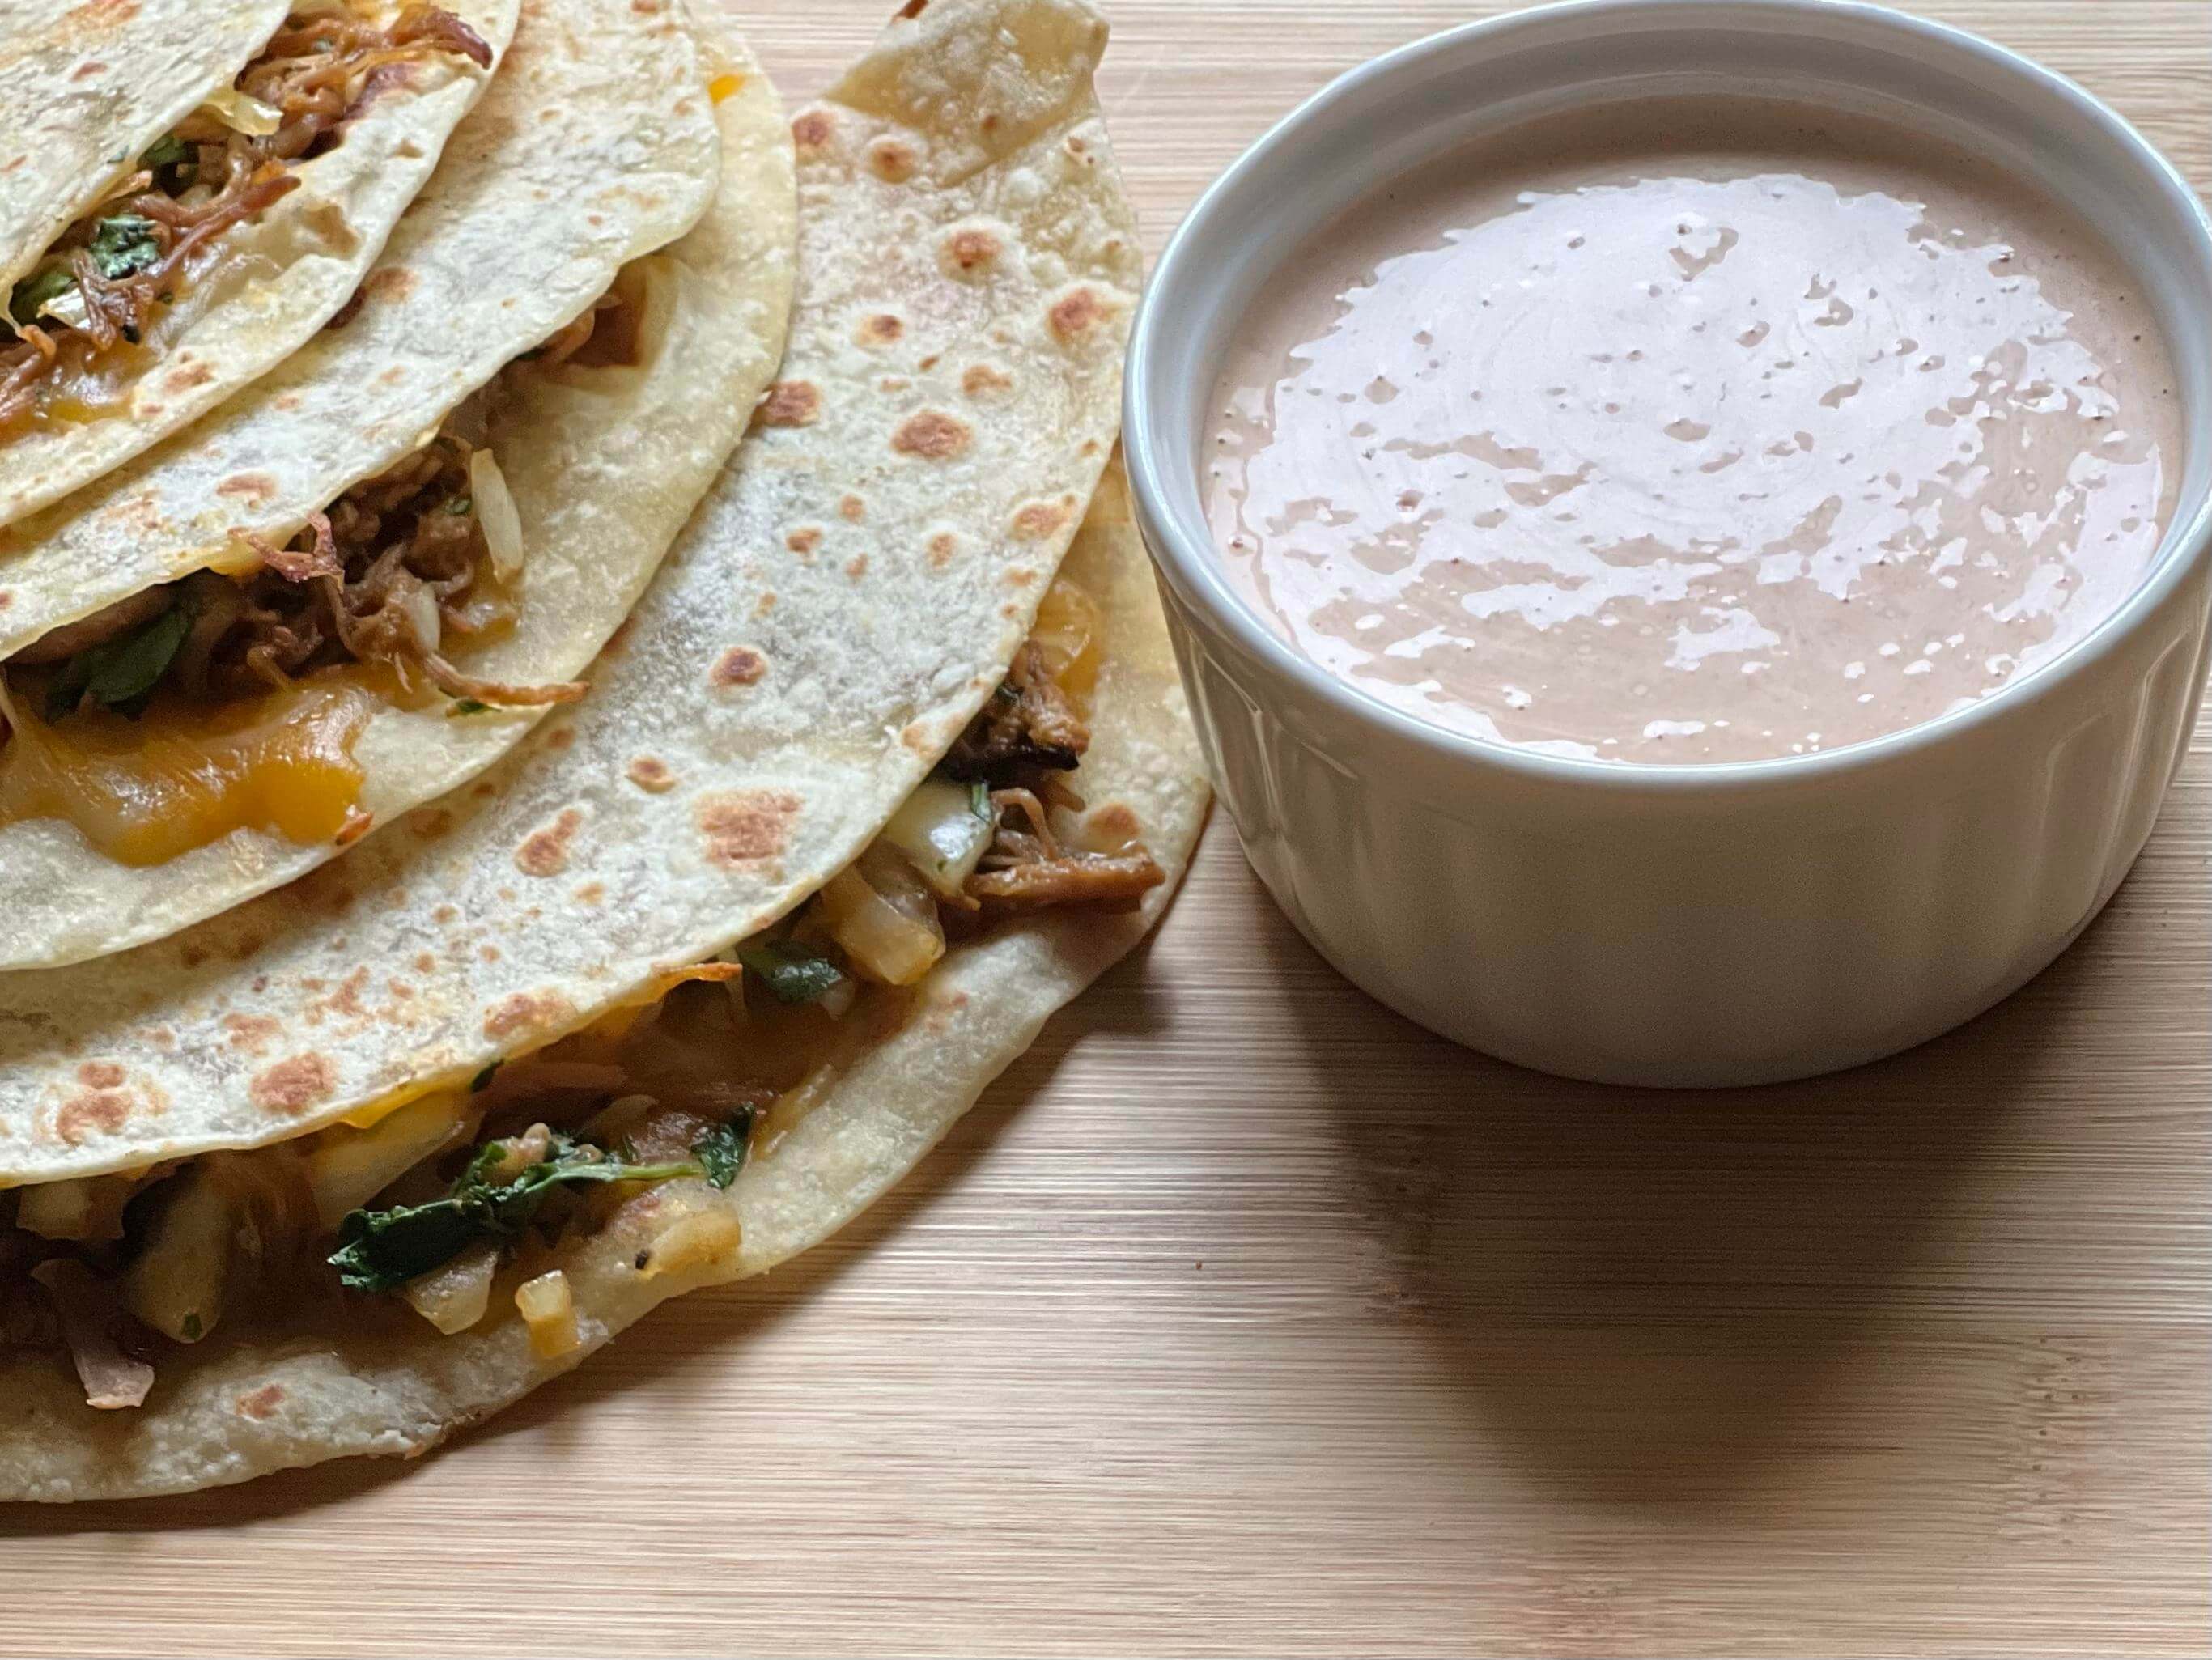 Pulled Pork Quesadillas With Creamy Chipotle Sauce